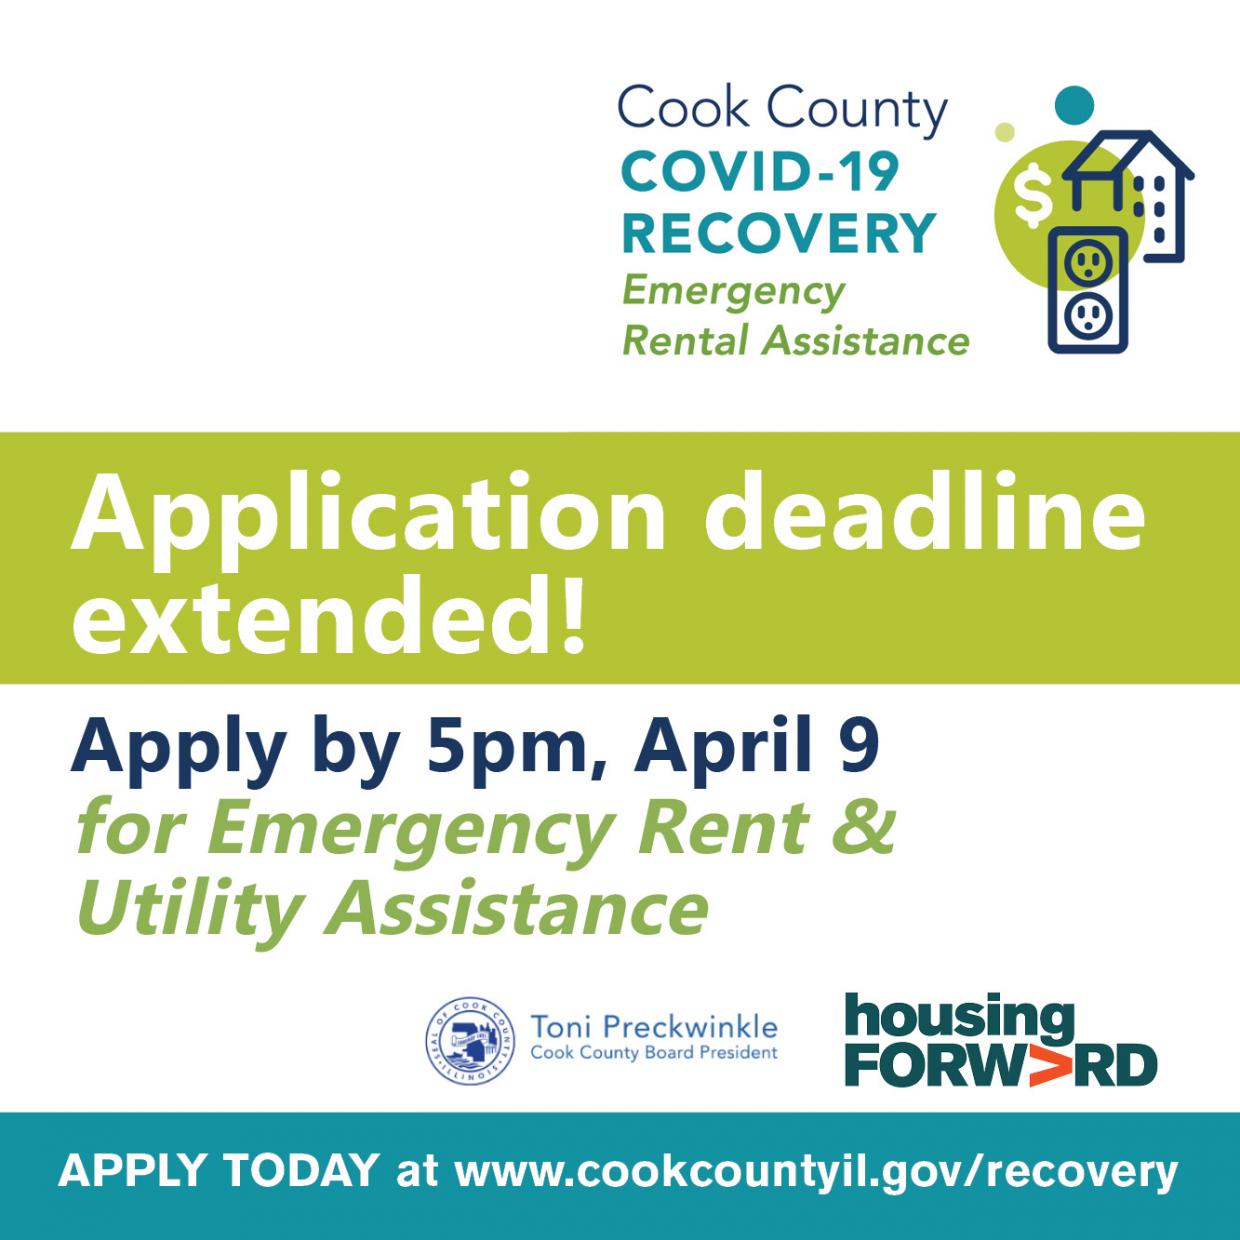 Applications Extended for Emergency Rental Assistance